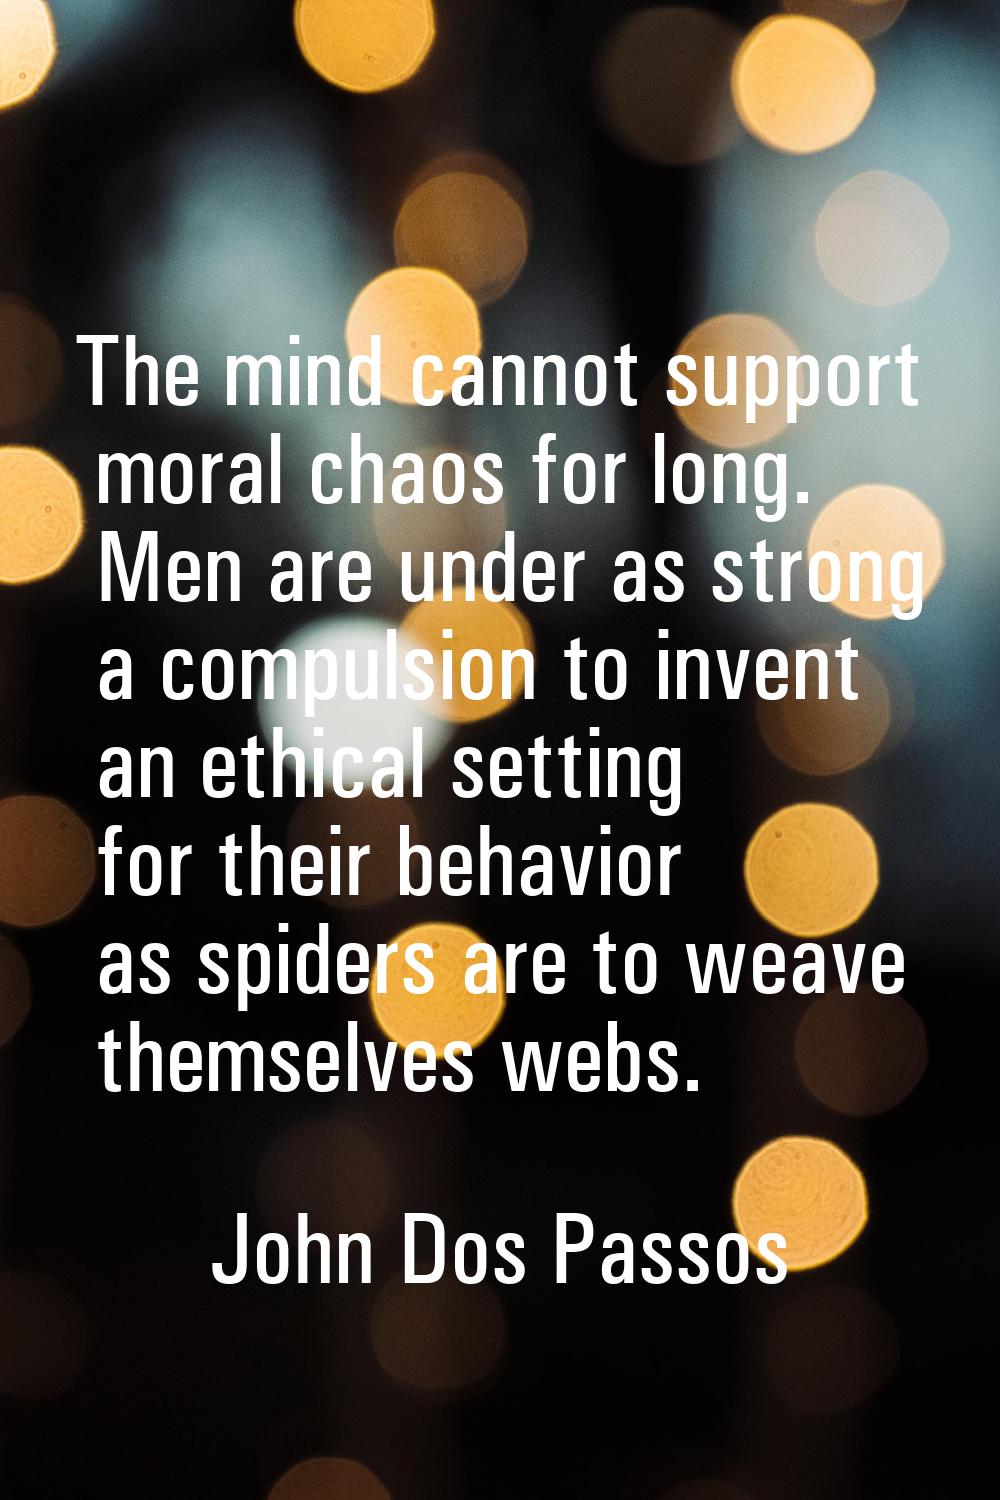 The mind cannot support moral chaos for long. Men are under as strong a compulsion to invent an eth